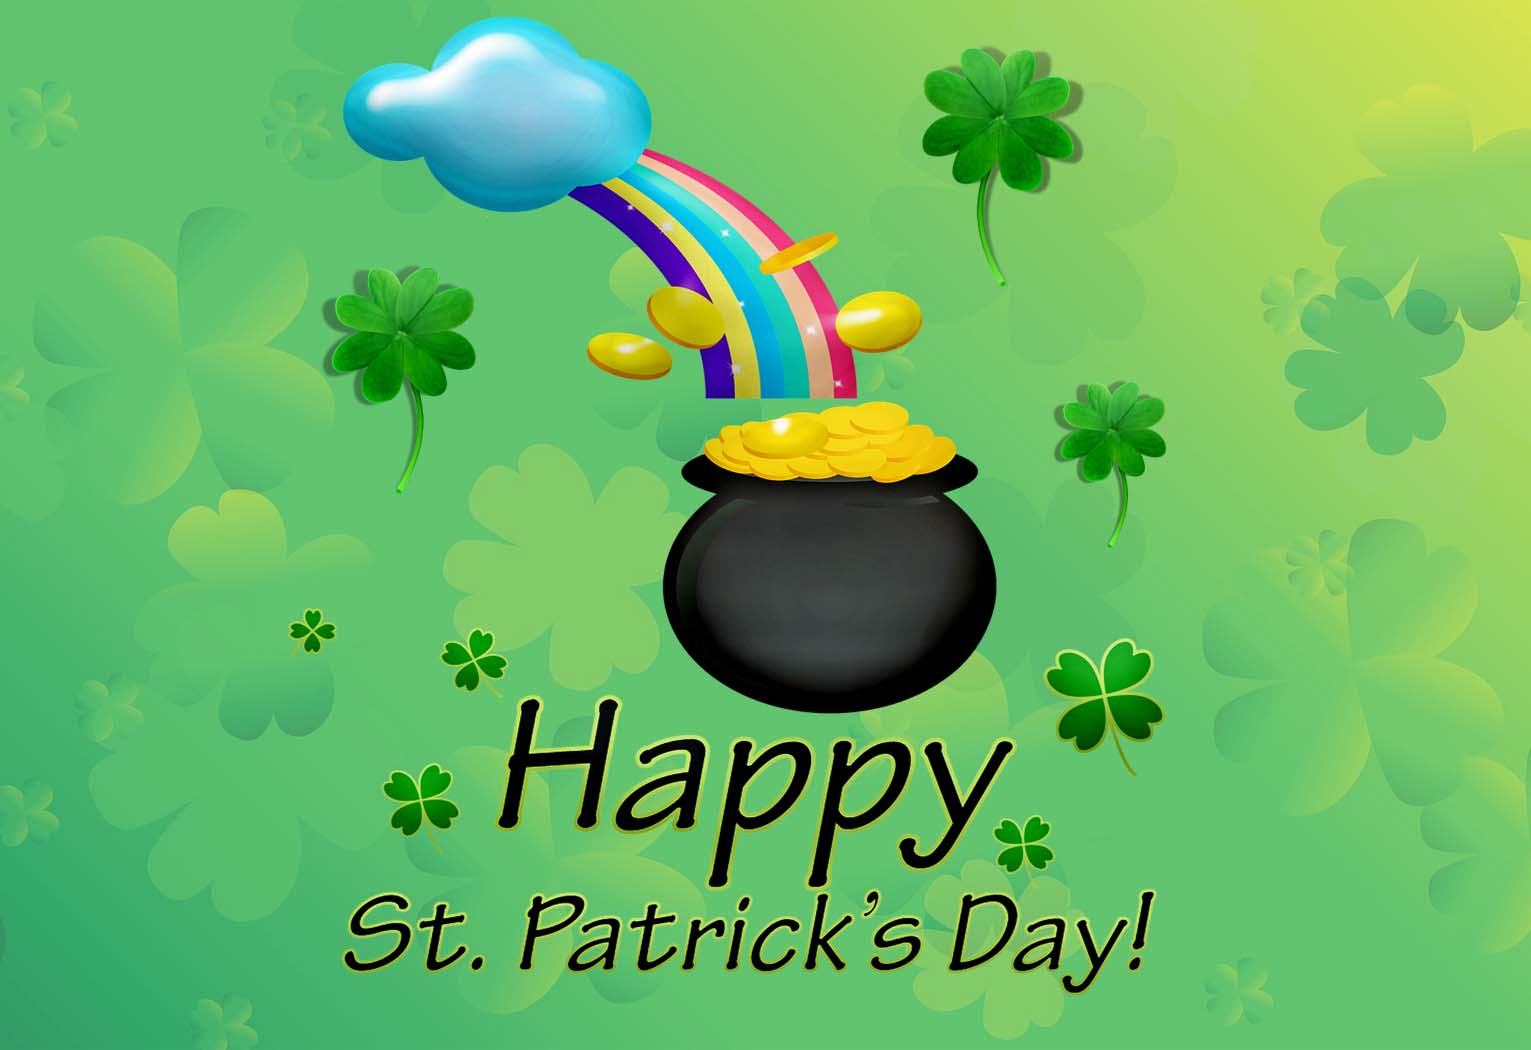 Happy St. Patrick's Day Images 2022